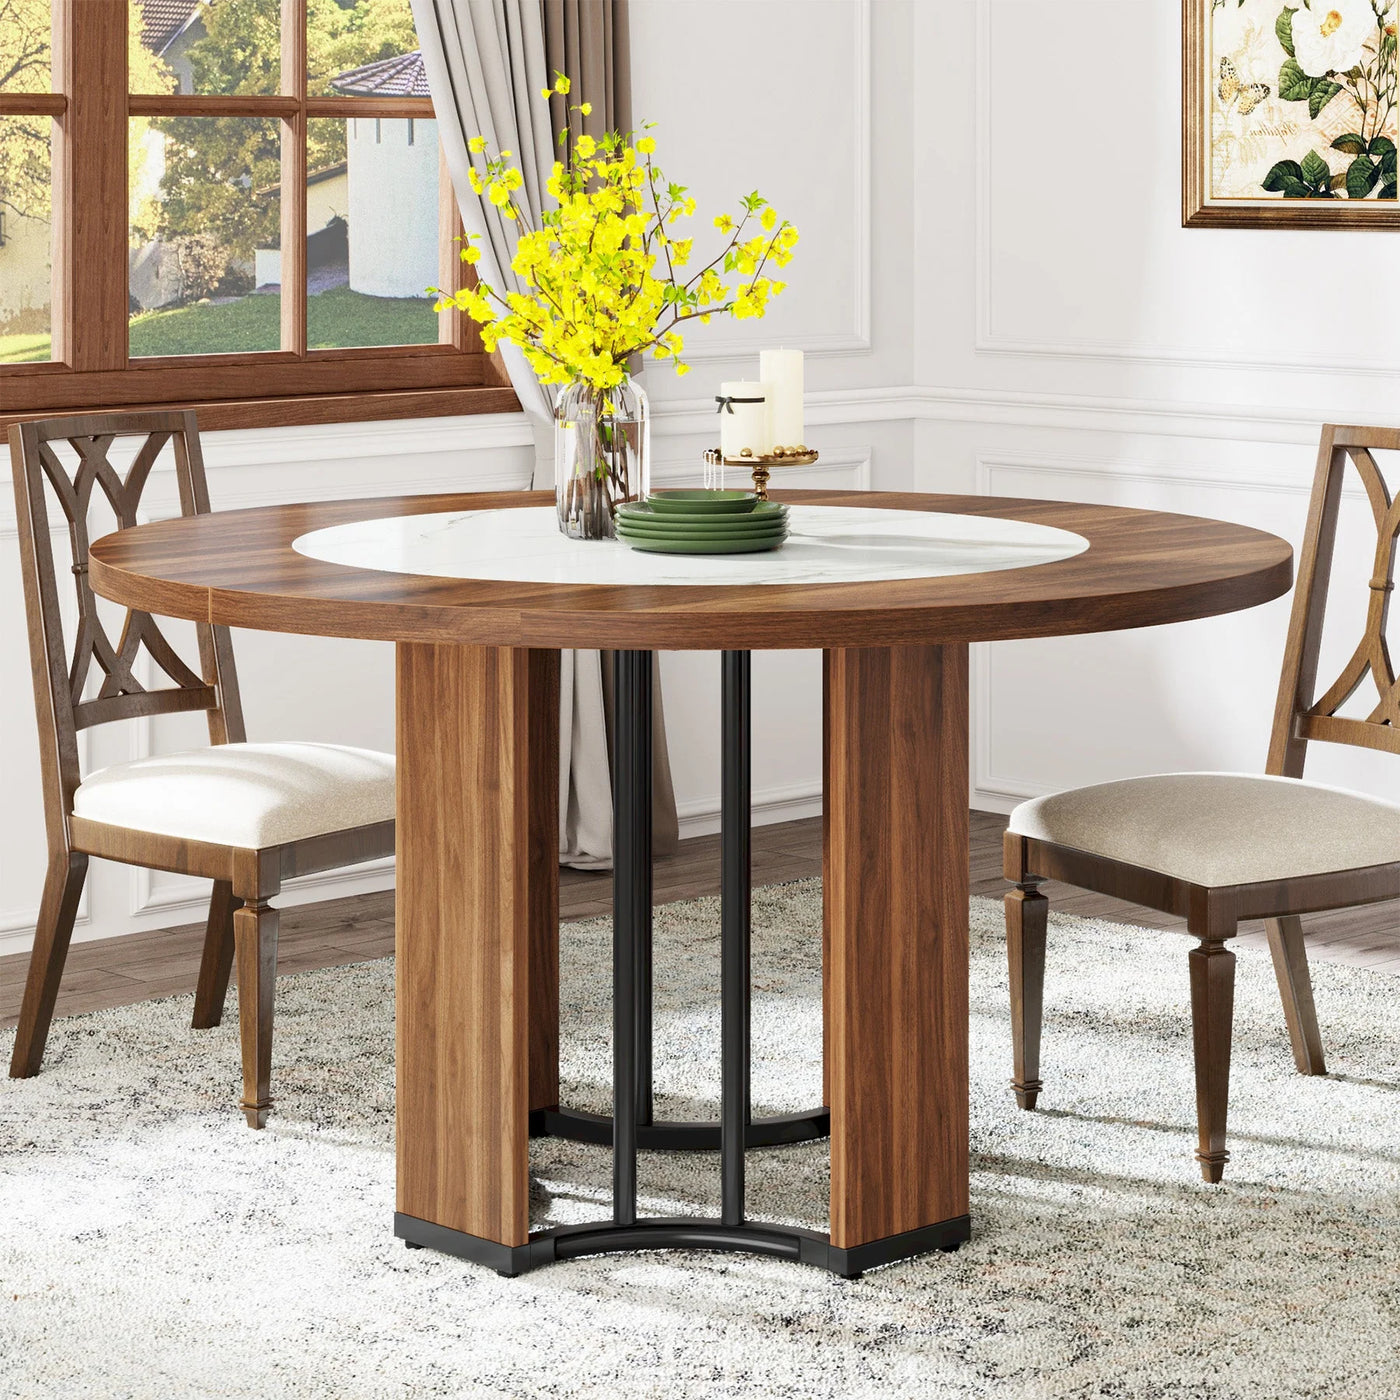 Latte 47" Round Dining Table | Wood Circle Kitchen Table with Metal Base